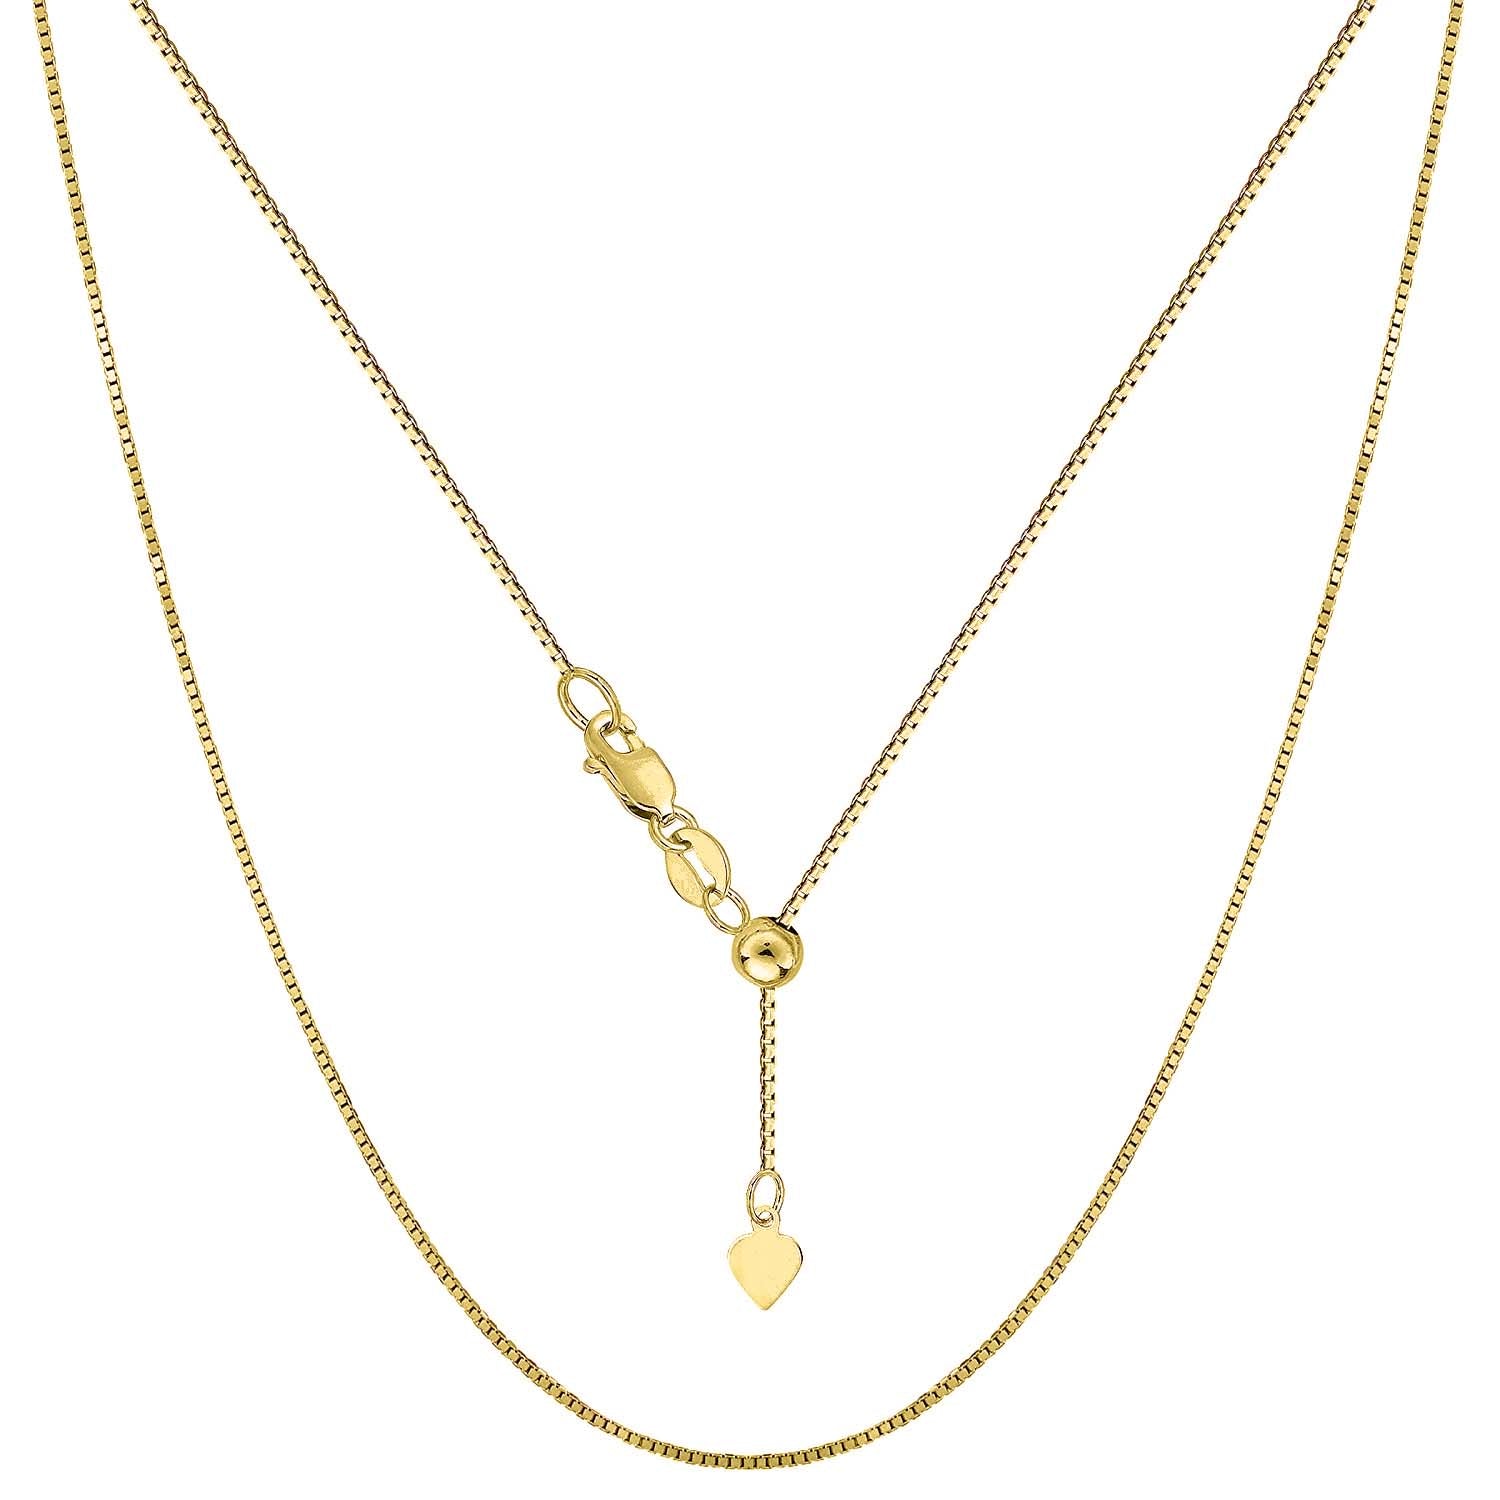 Gold Italian Sterling Silver Adjustable Box Chain Necklace